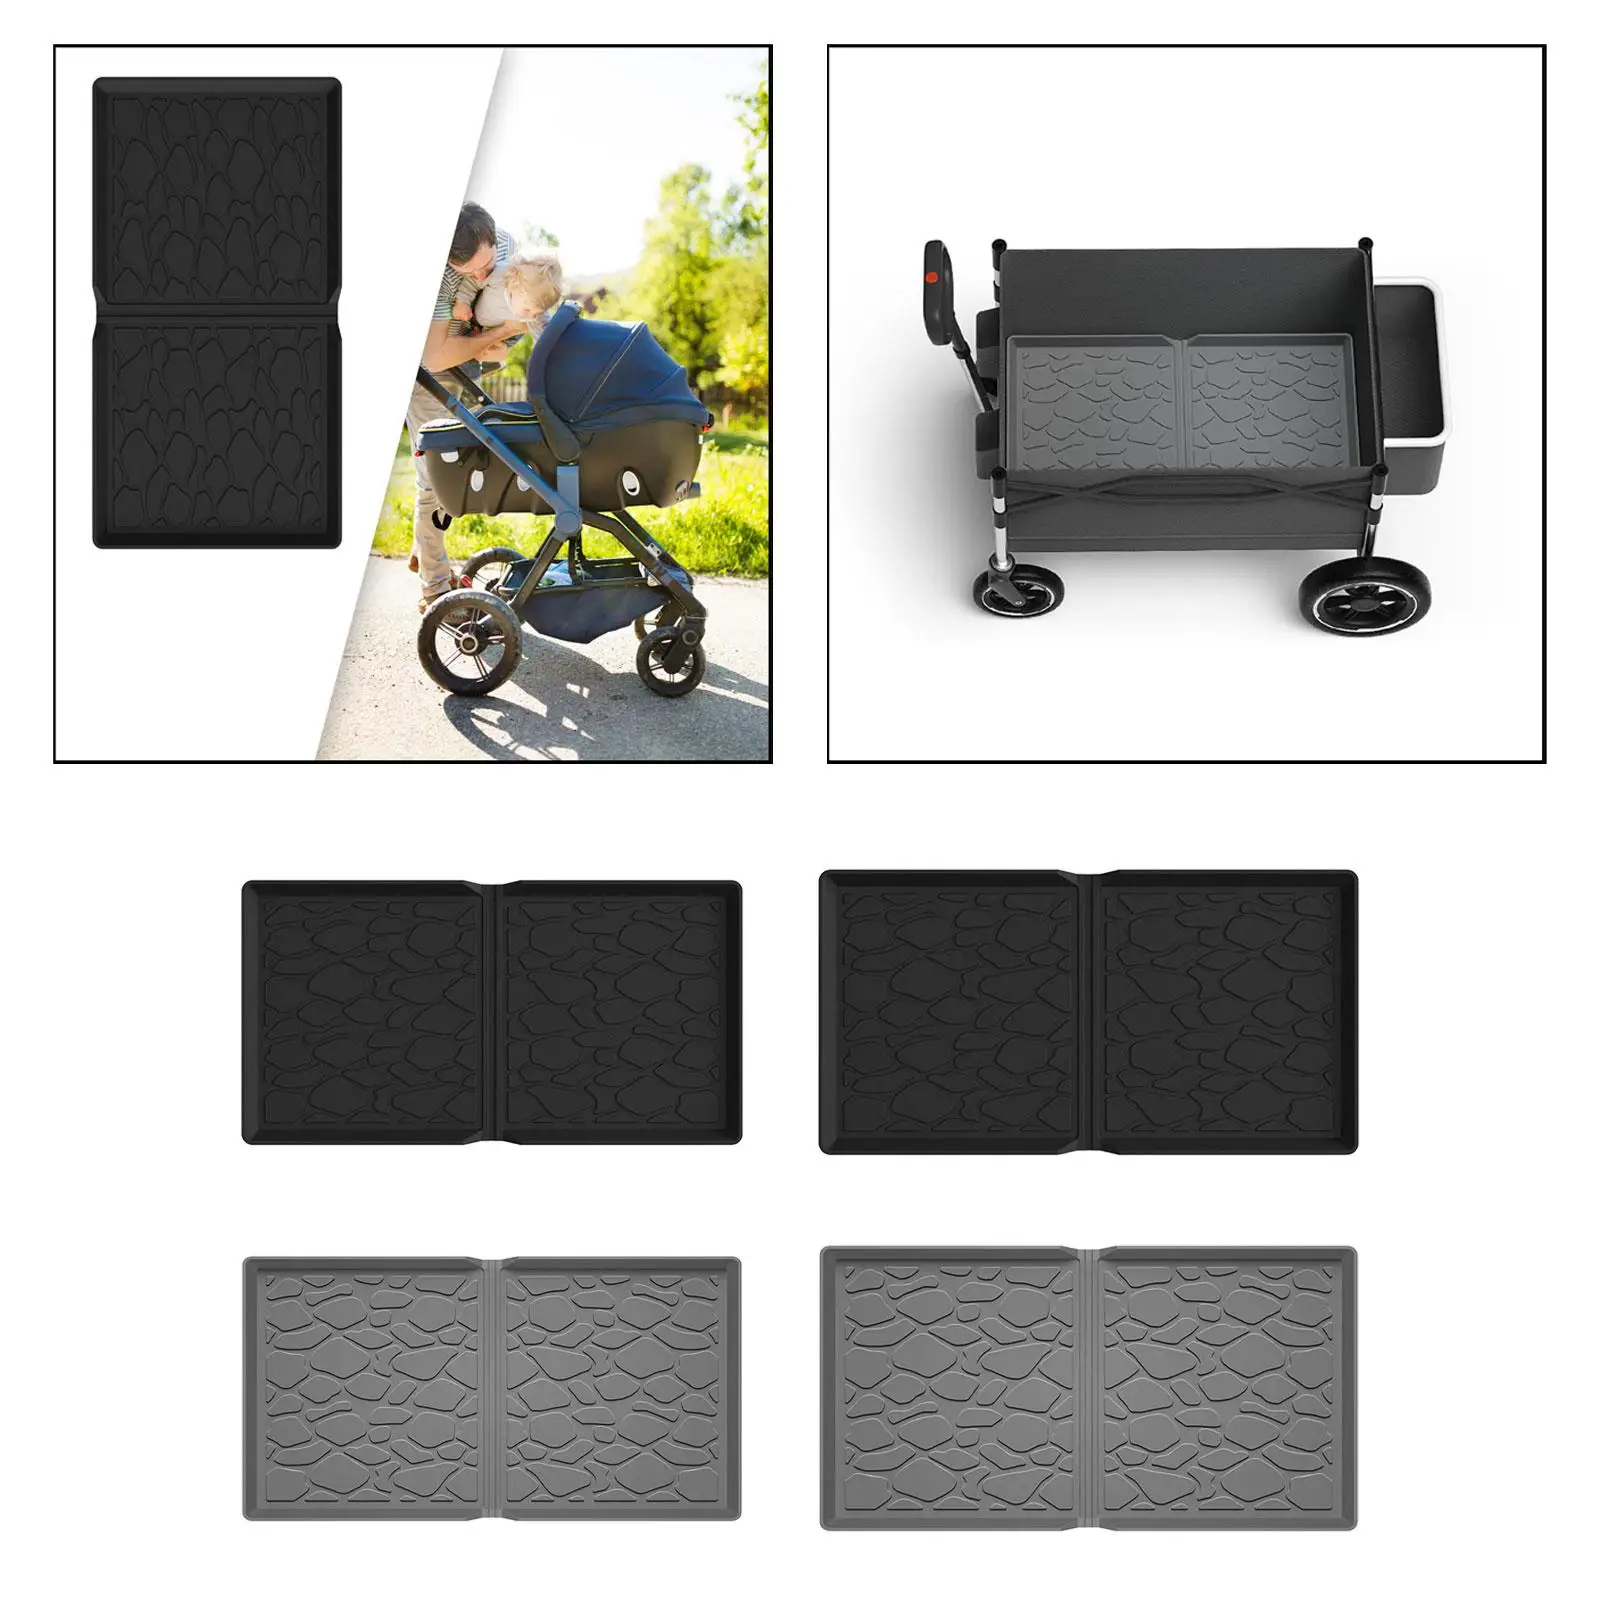 Silicone Stroller Wagon Mat Sturdy Protection Protect from Sand Dirt Foldable for Baby Toddler All Weather Mat Wagon Accessory